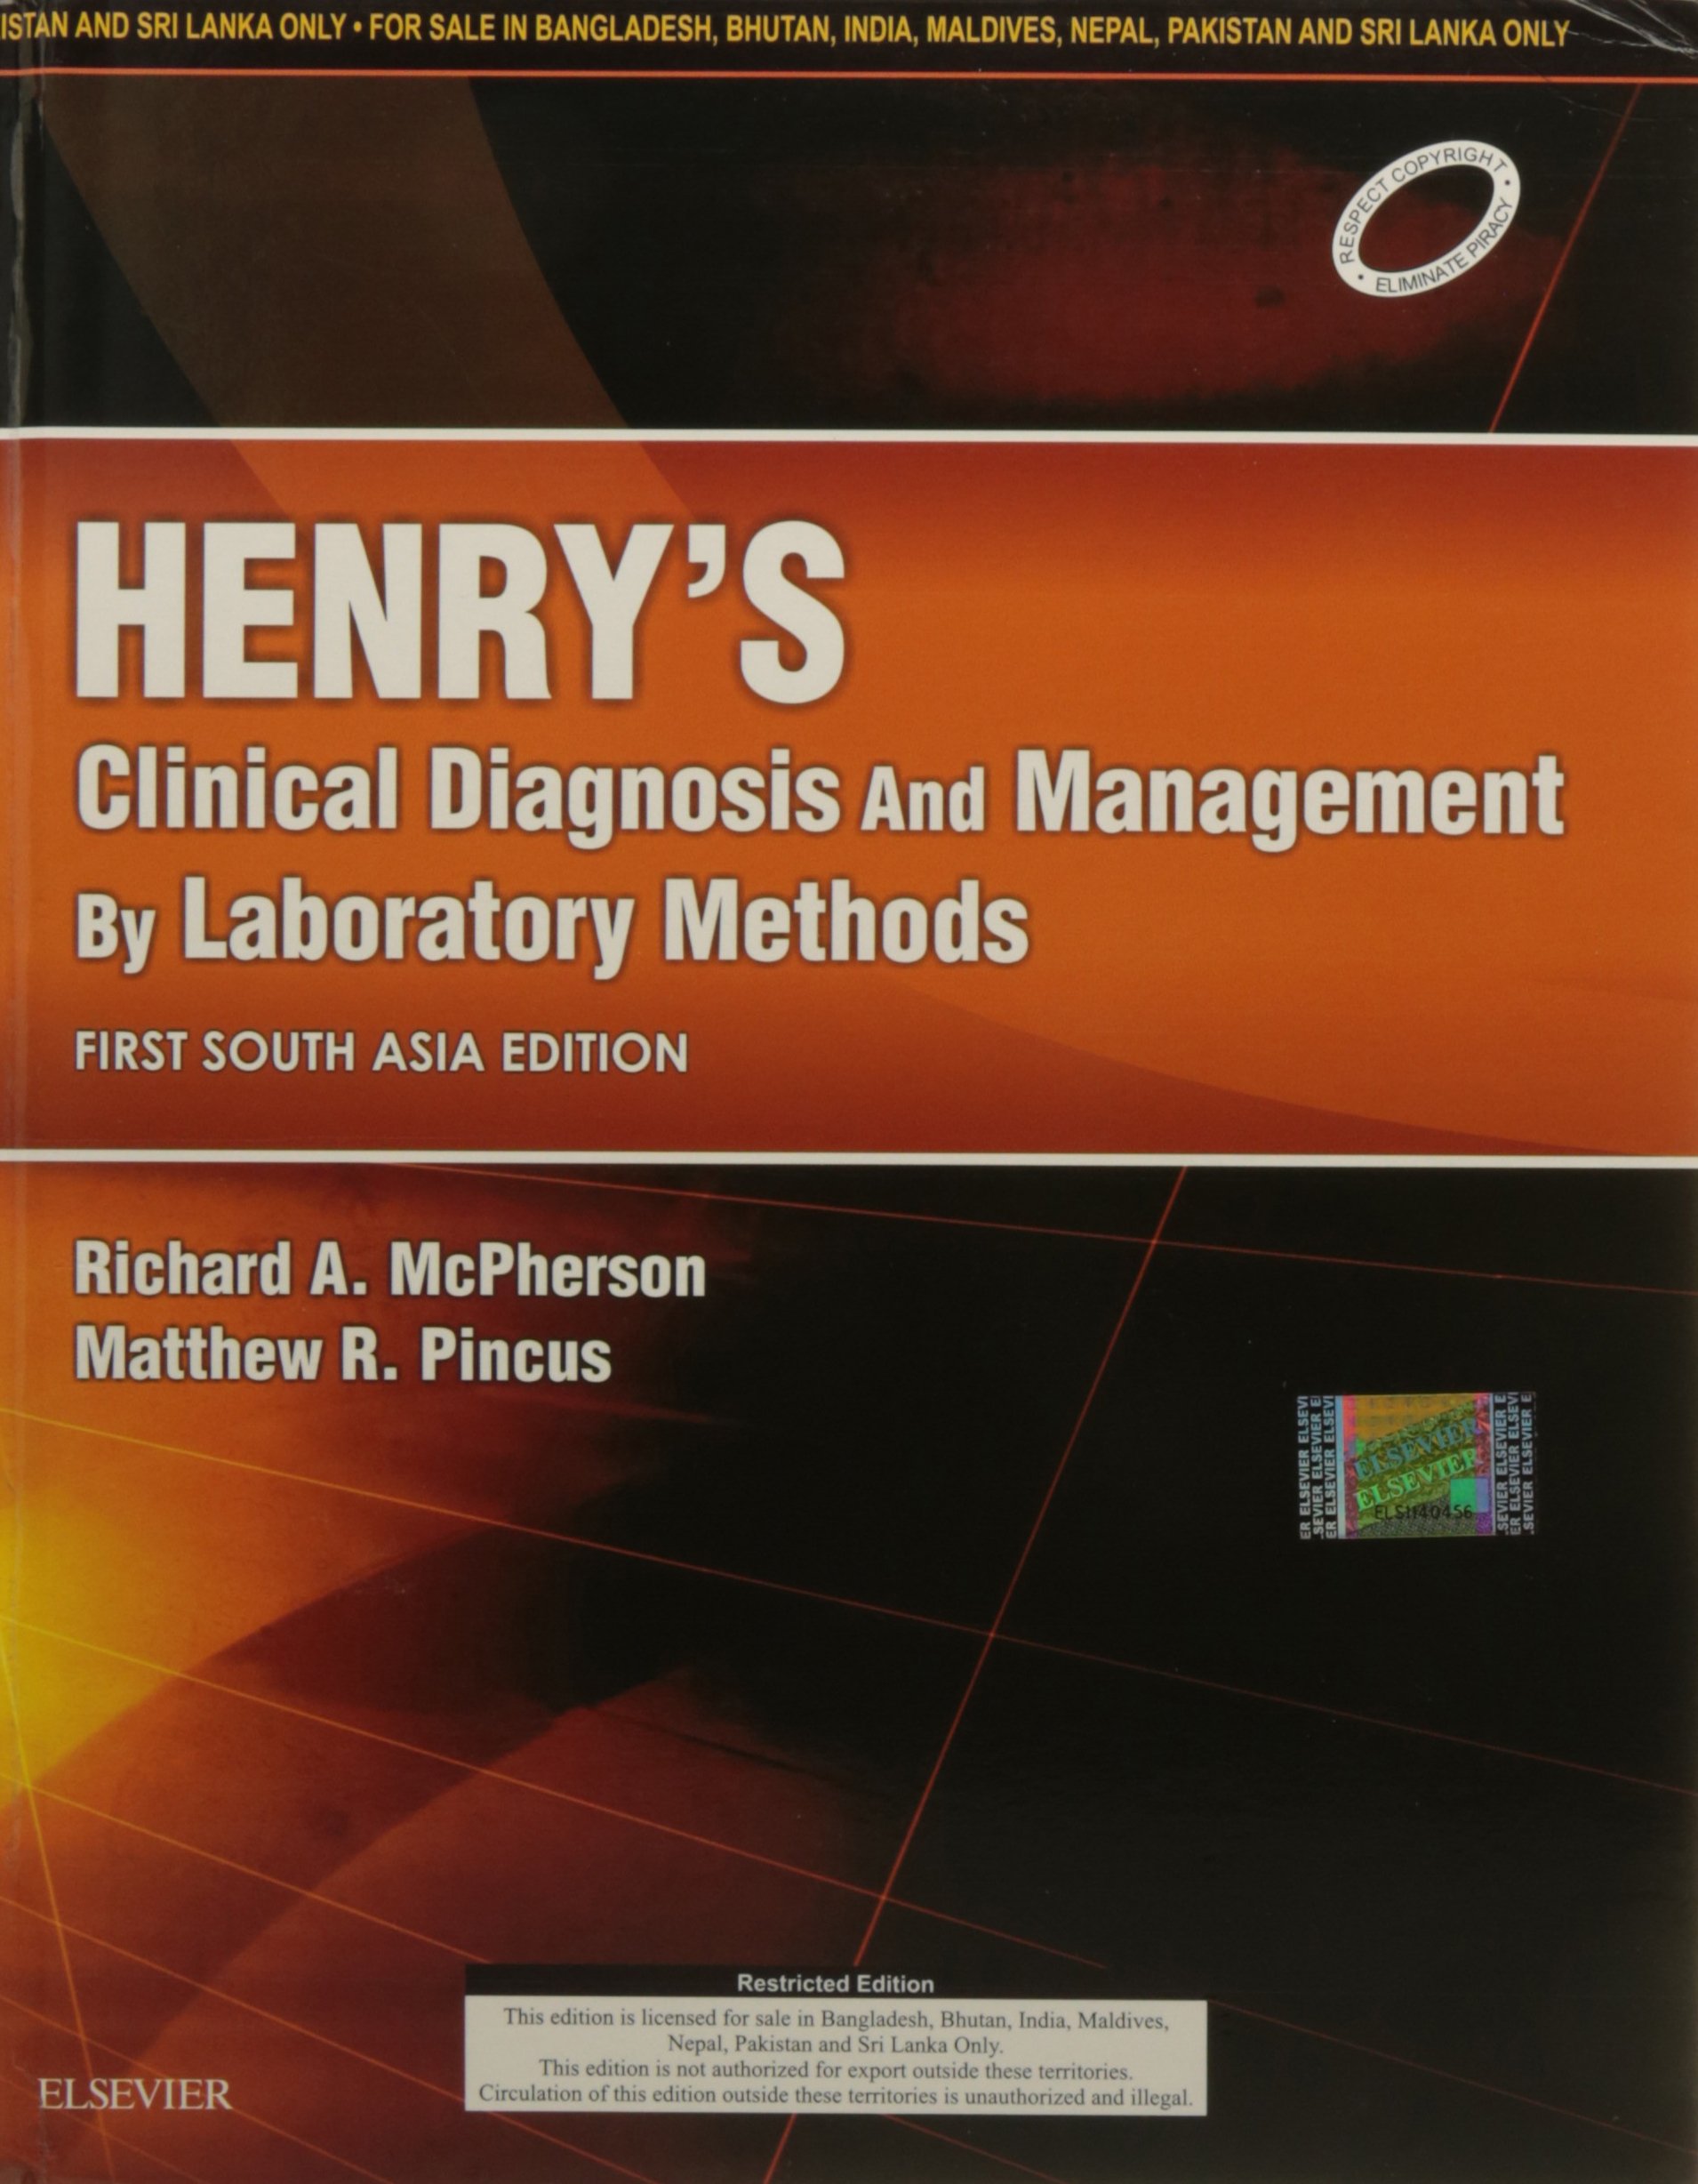 Henry's Clinical Diagnosis and Management by Laboratory Methods: First South Asia Edition